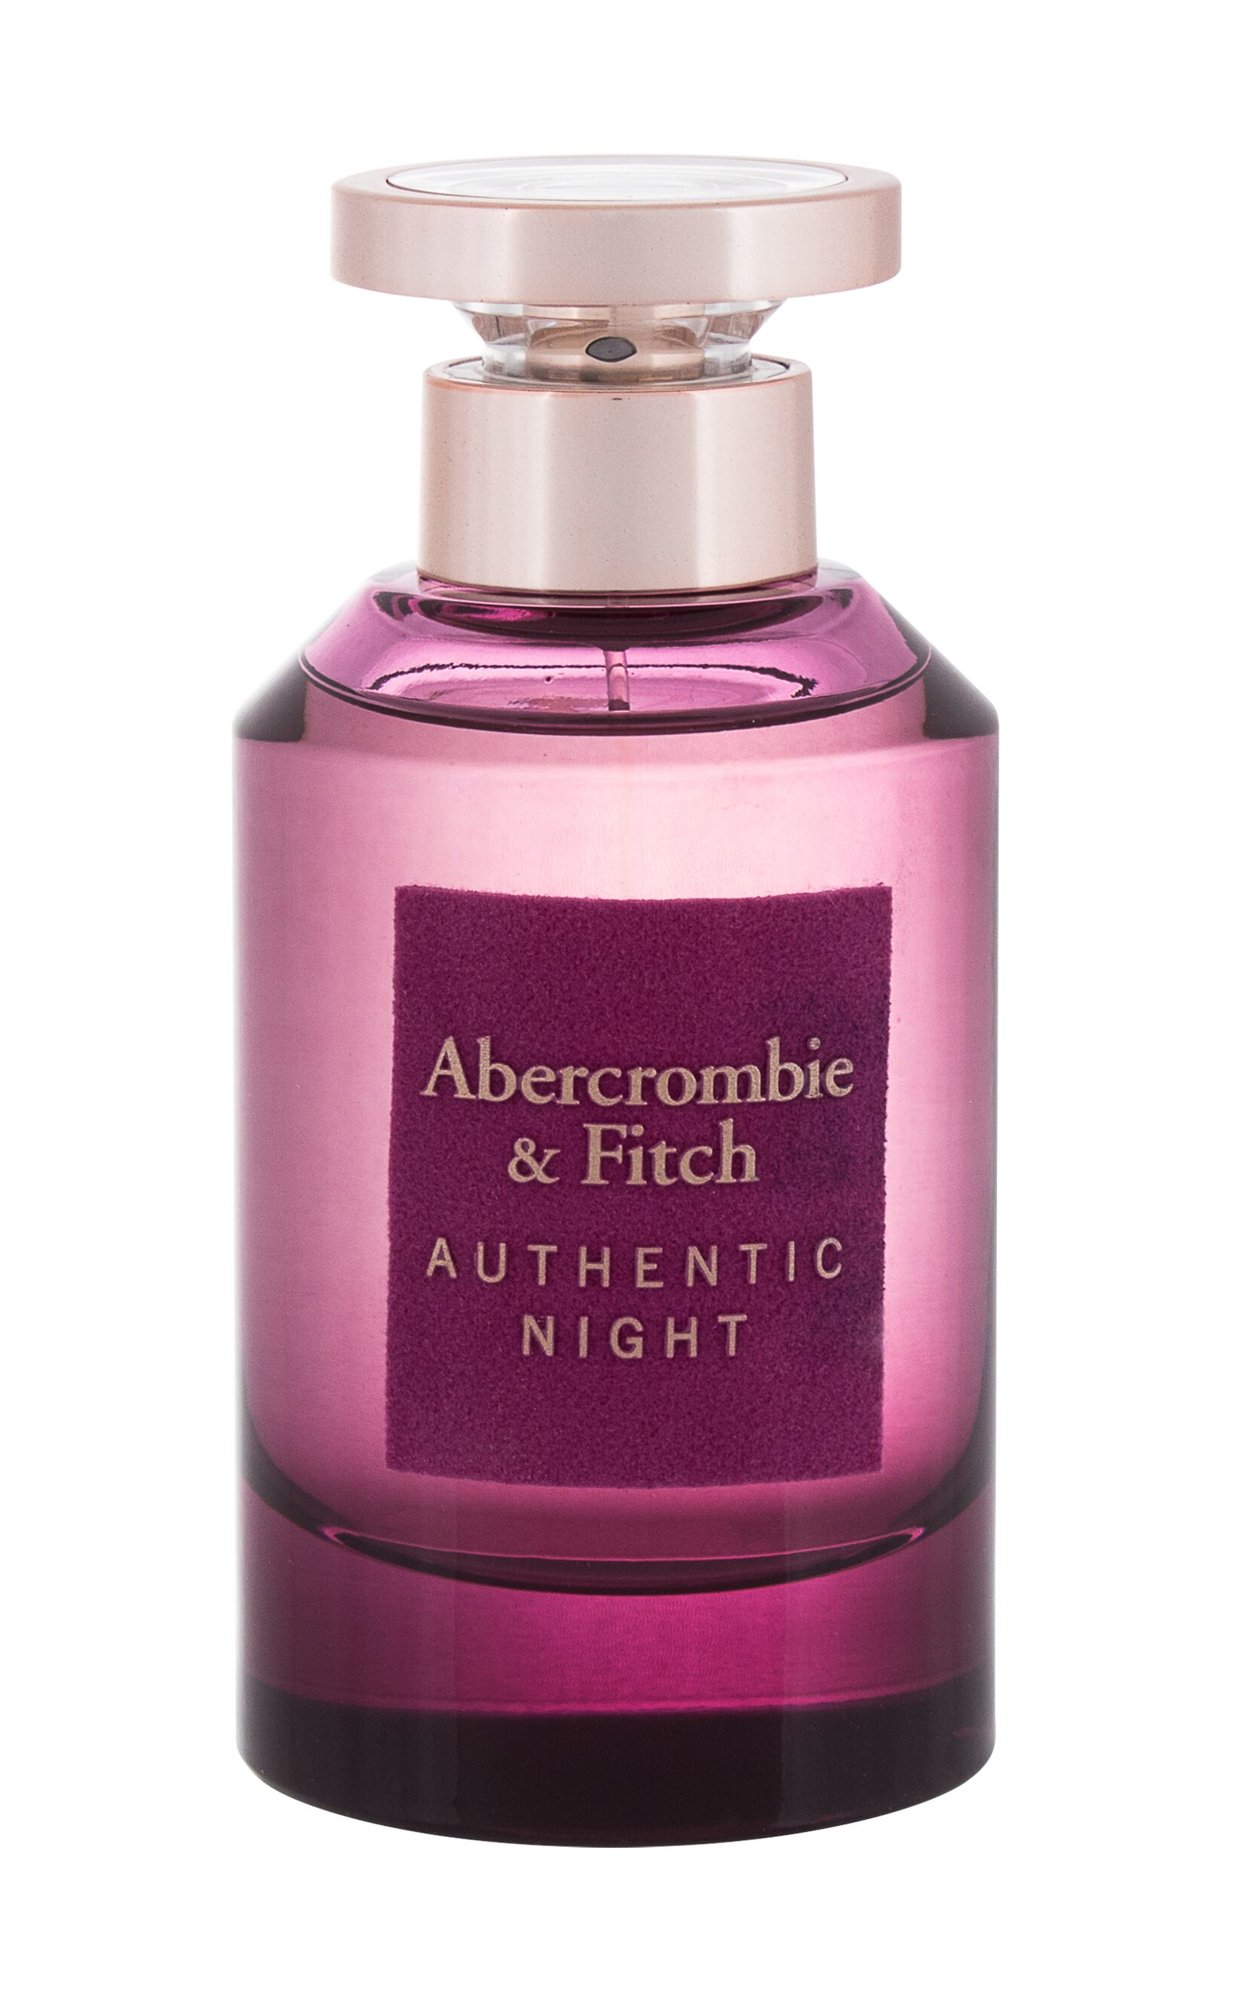 Abercrombie & Fitch Authentic Night, edp 100ml